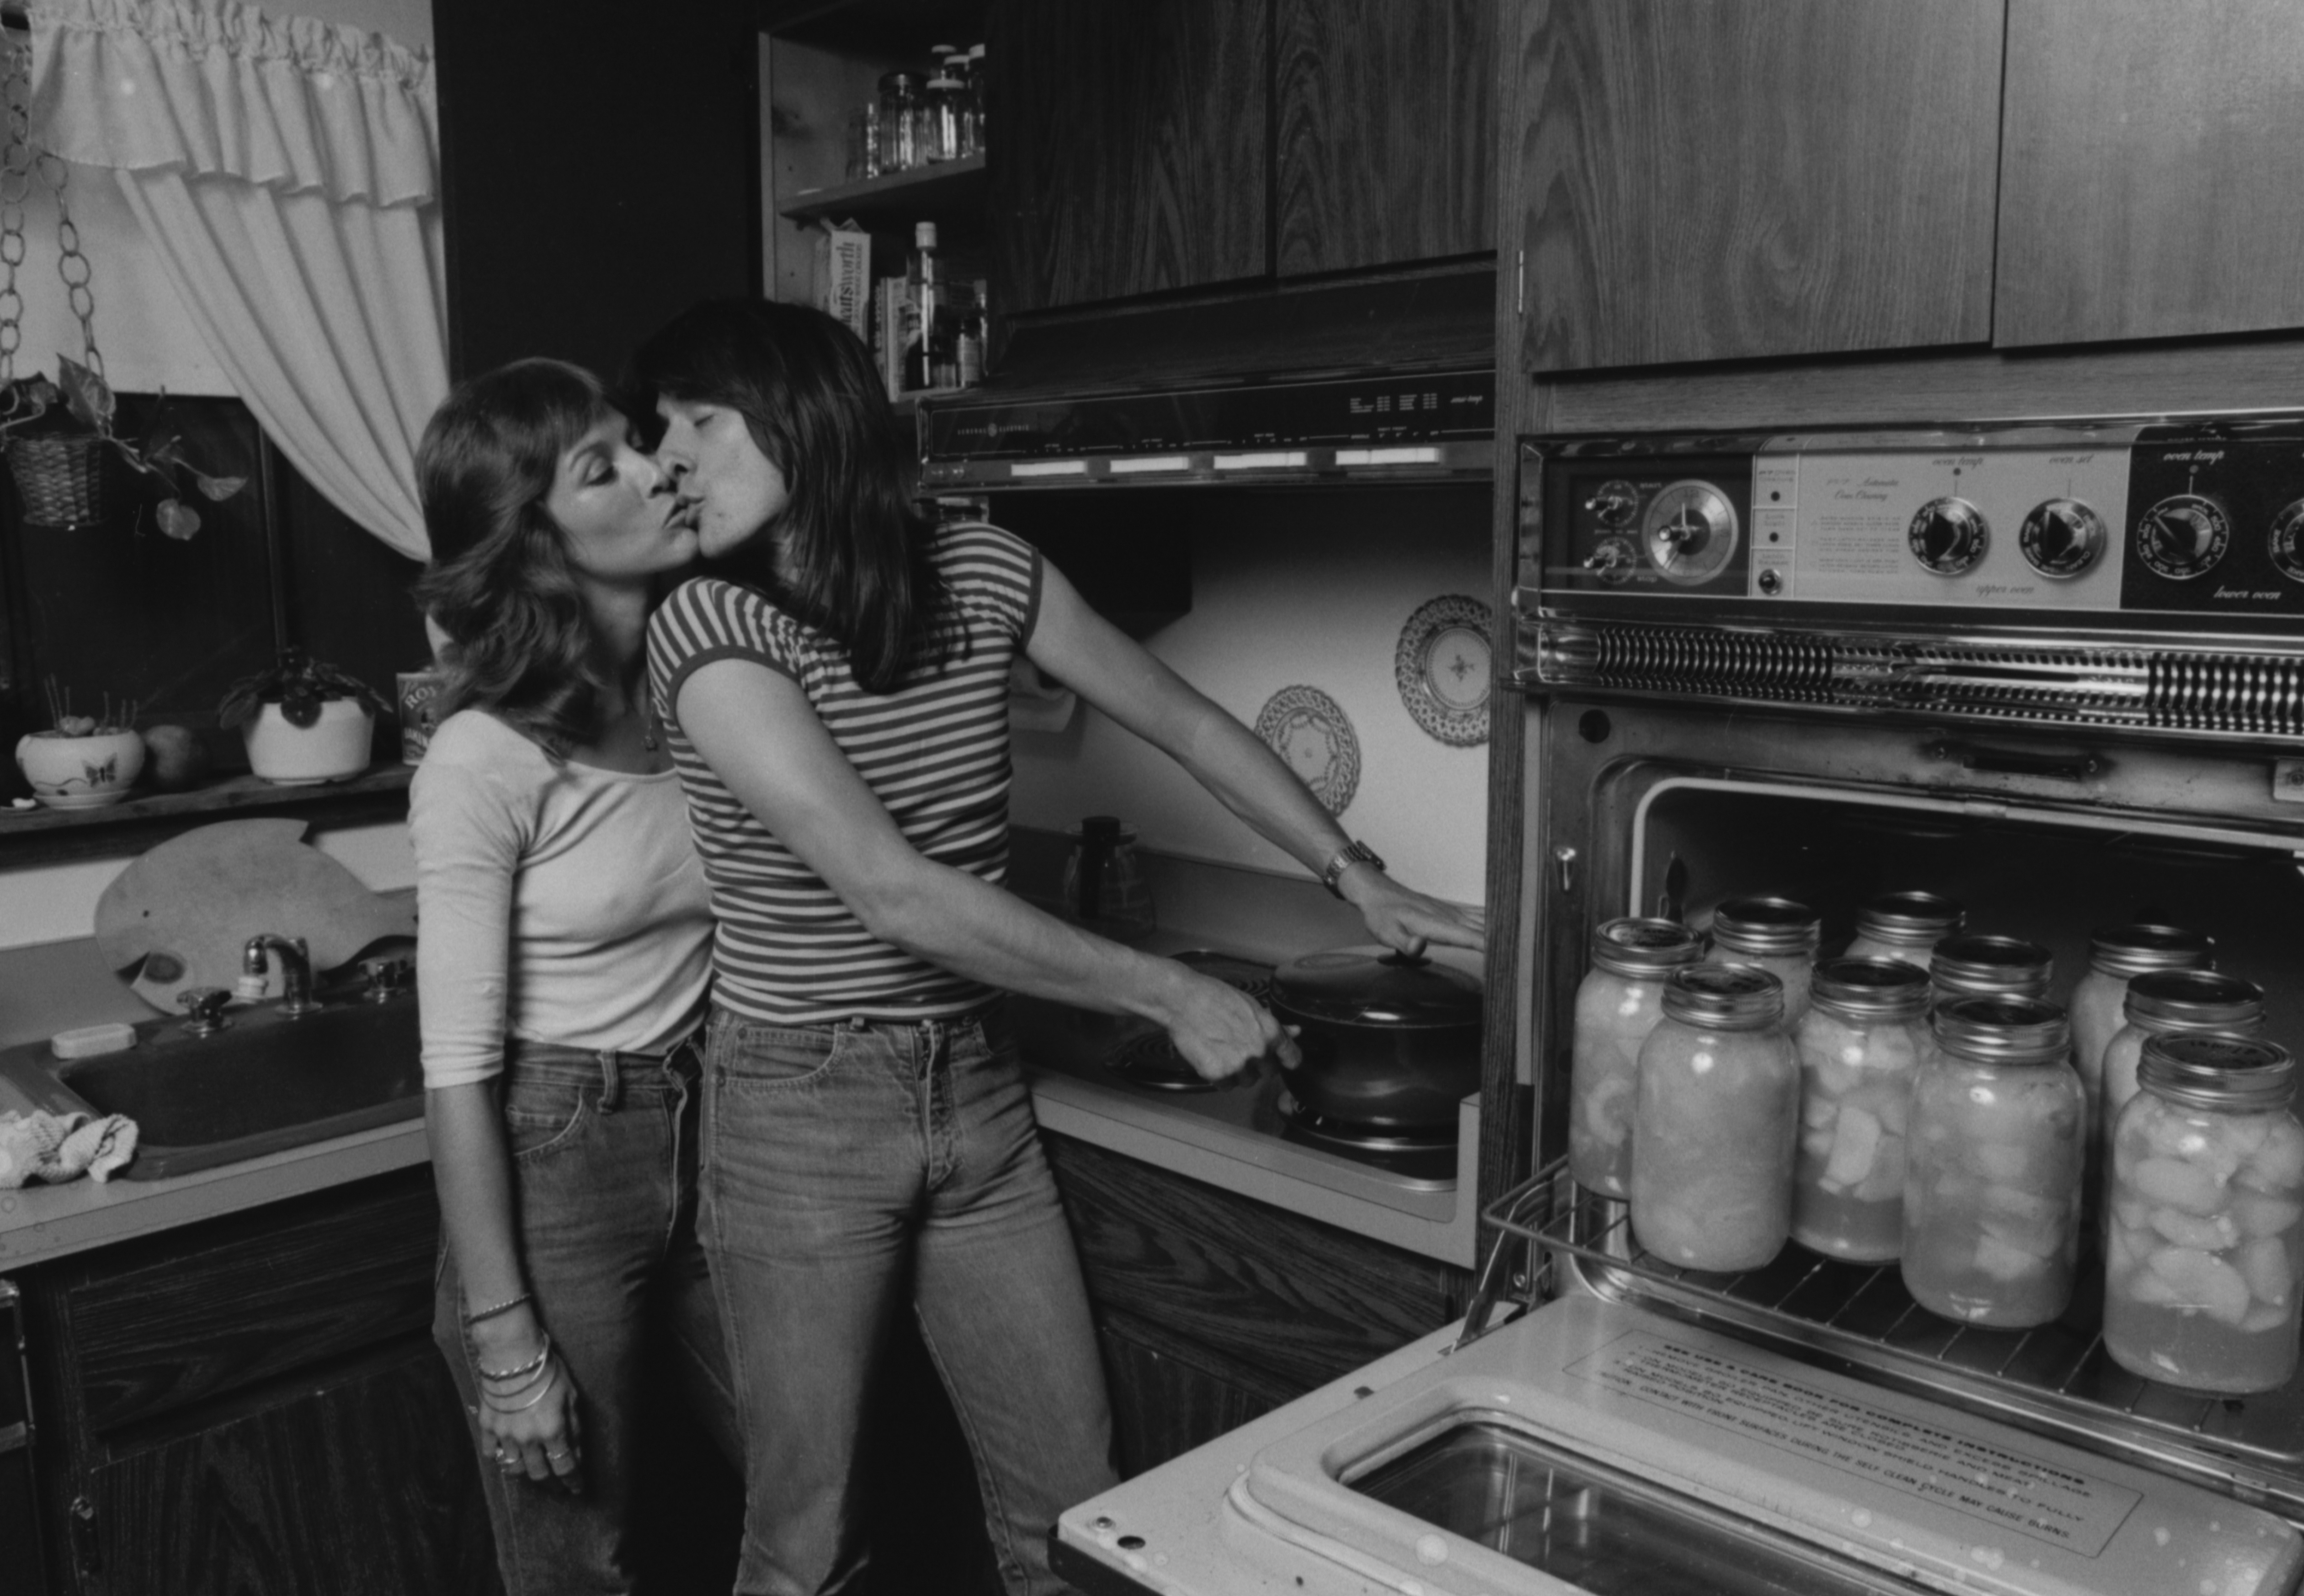 An undated photo of Sherrie Swafford and Steve Perry kissing in the kitchen. | Source: Getty Images